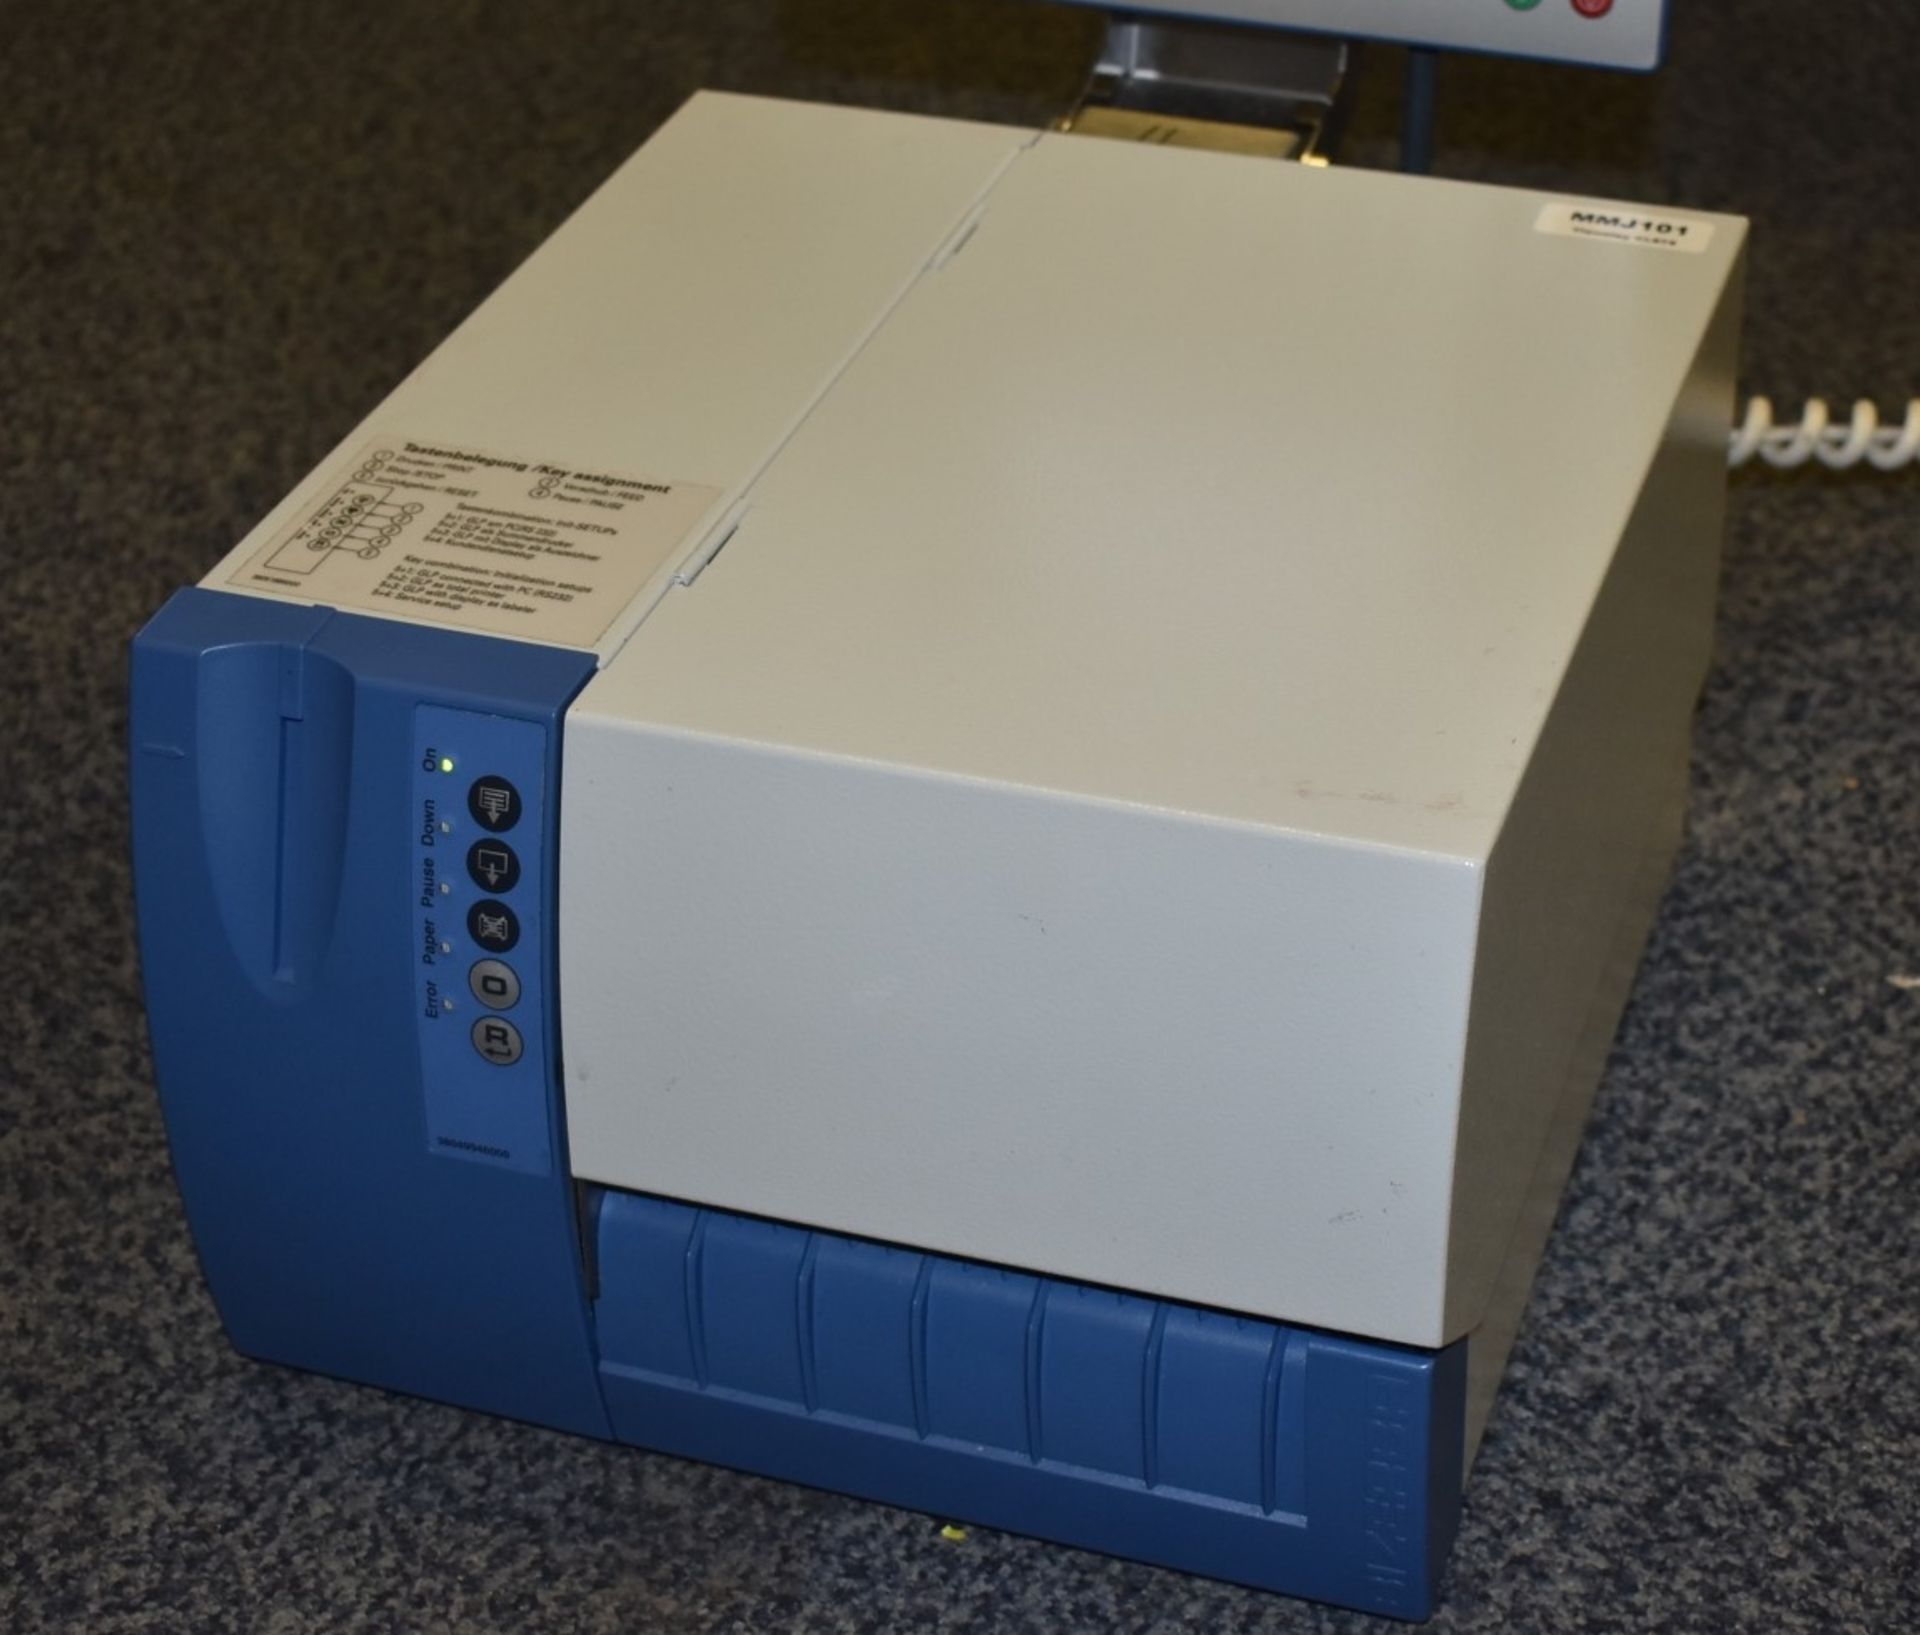 1 x Bizerba Industrial Label Printer GLPmaxx 160 With Colour Screen - Recently Removed From a - Image 6 of 15